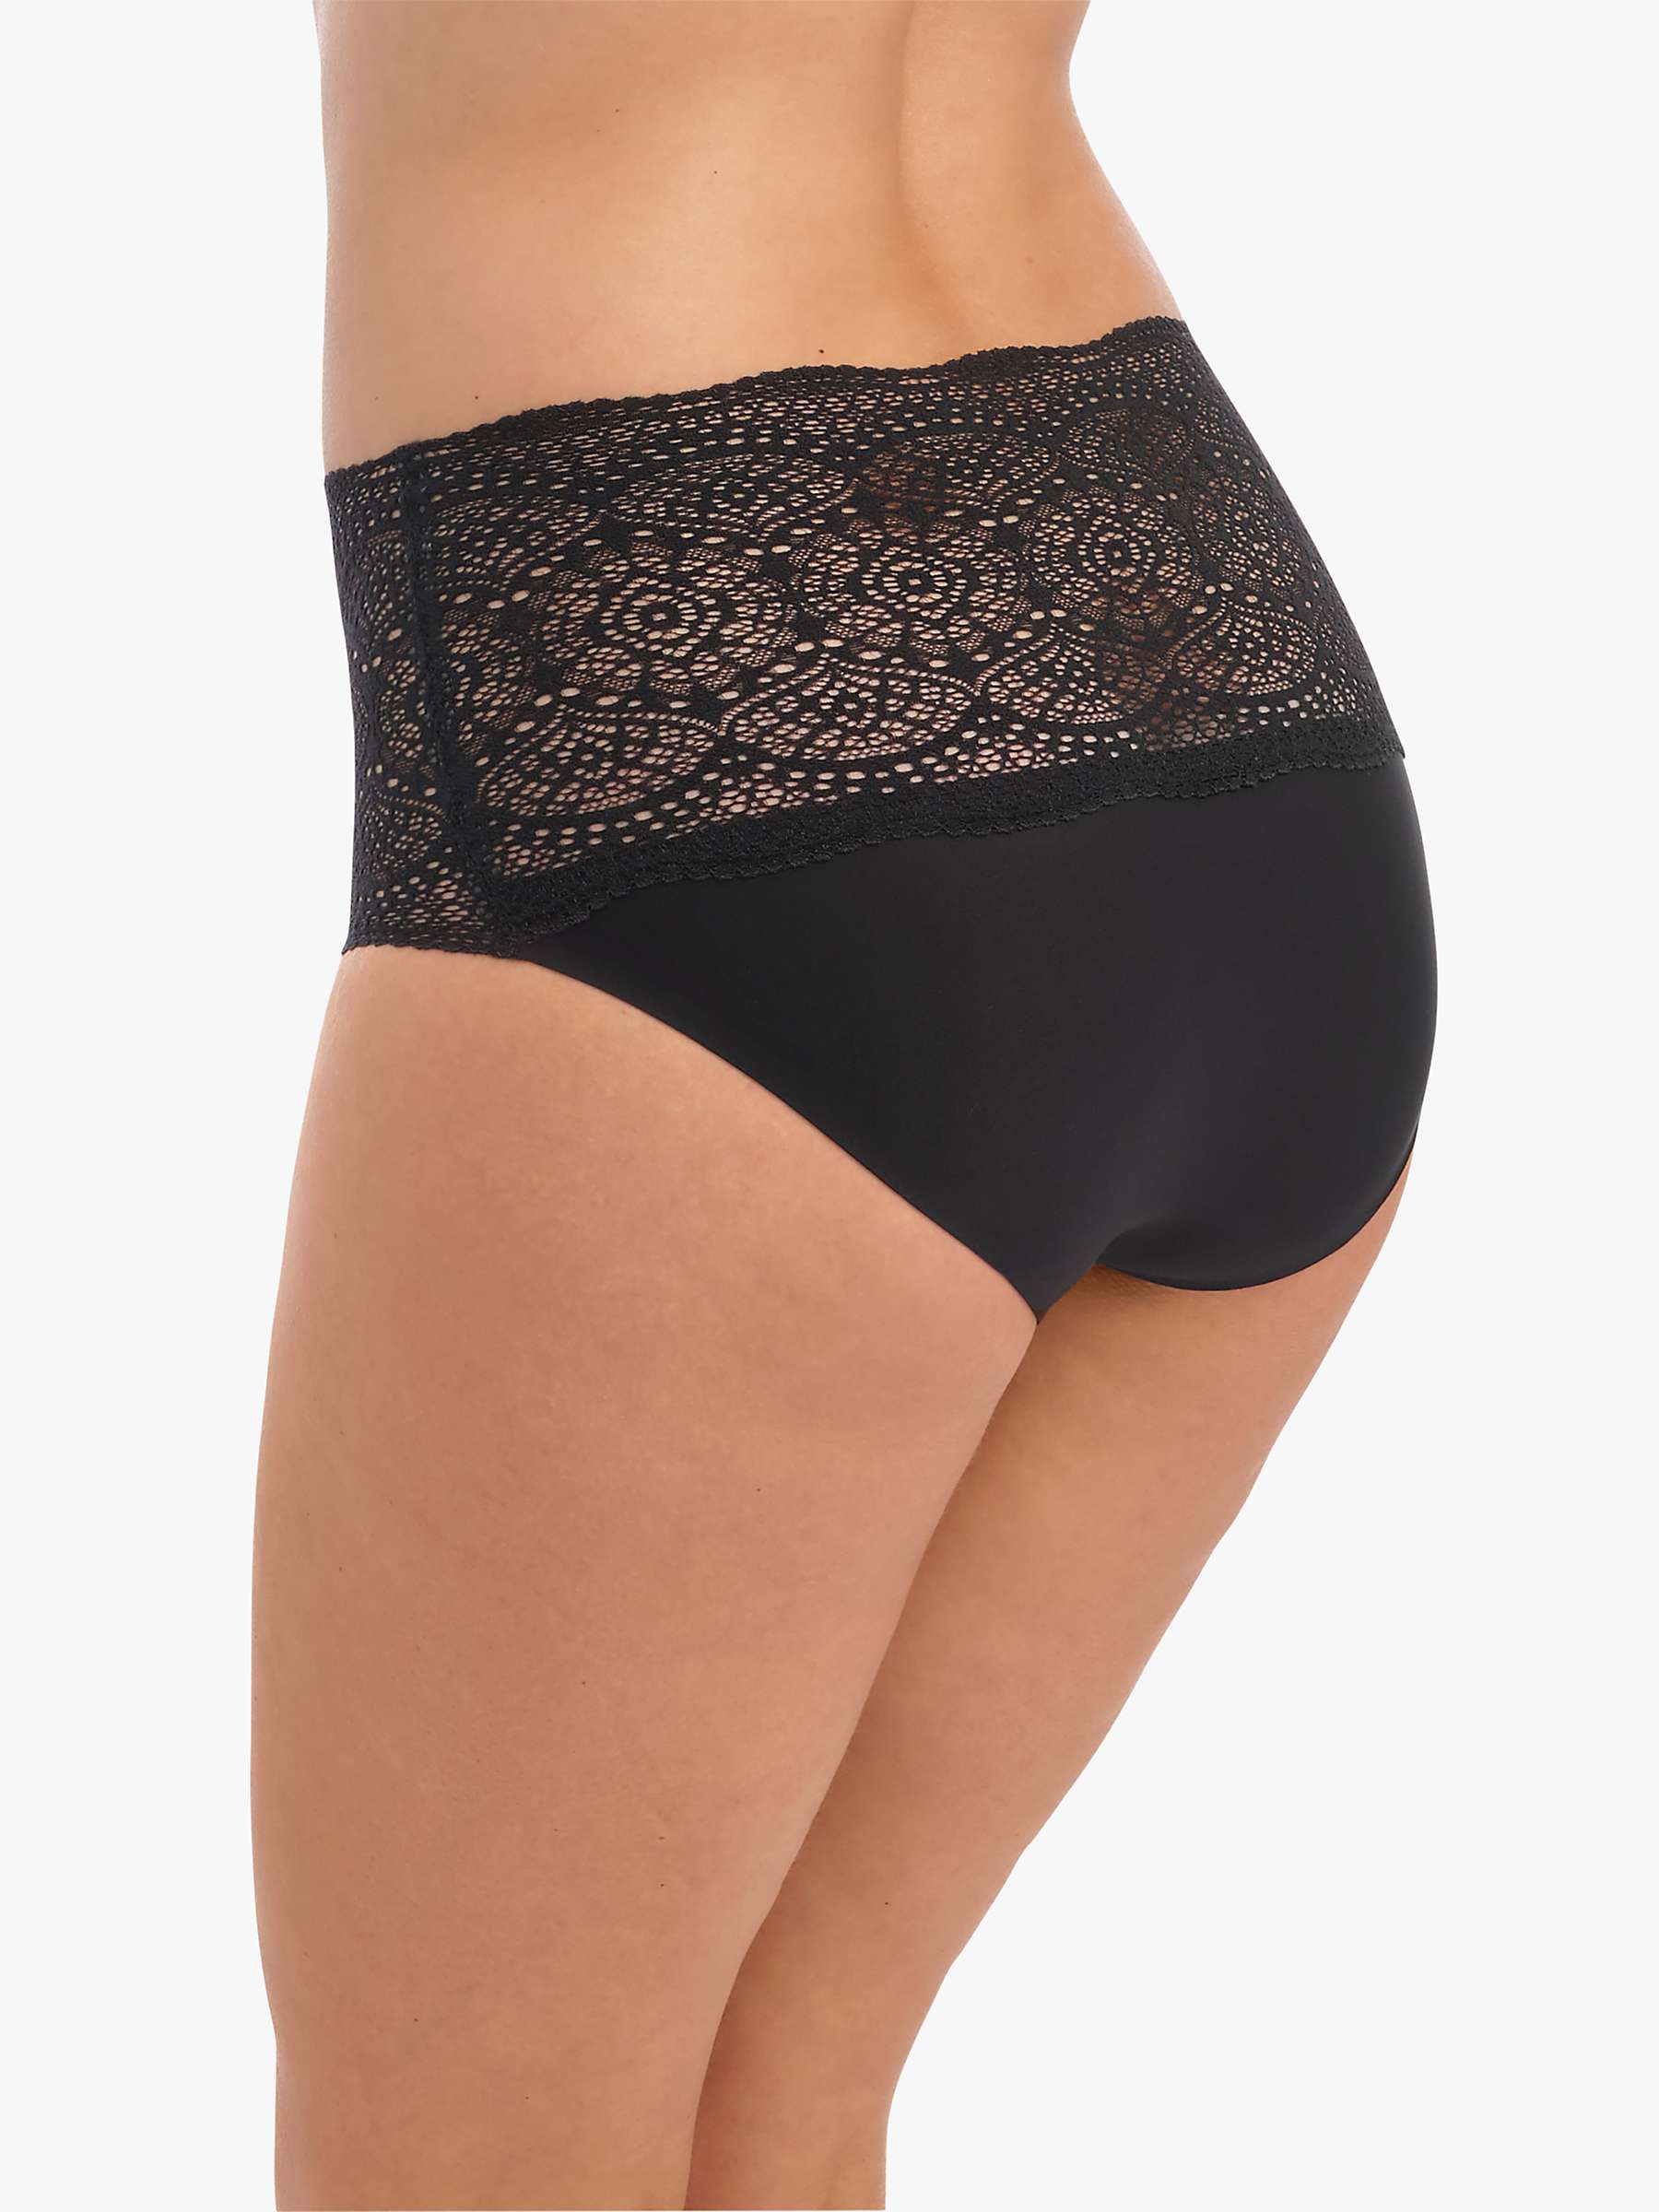 Buy Fantasie Lace Ease Invisible Stretch Knickers Online at johnlewis.com